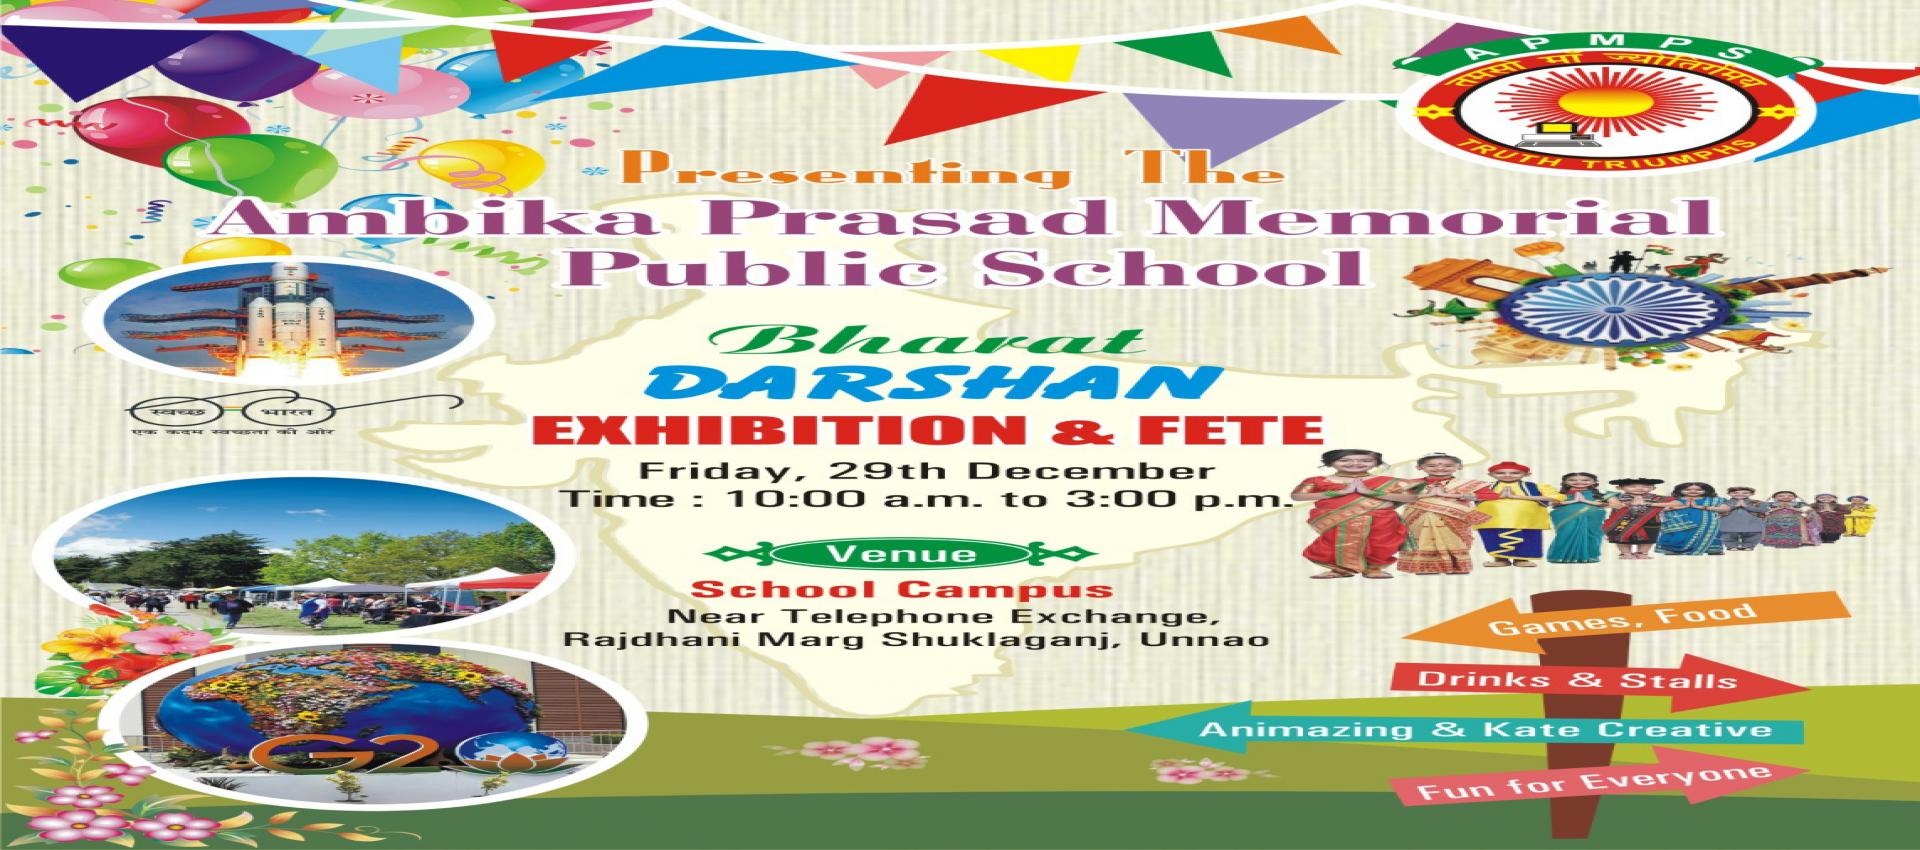 Bharat Darshan Exhibition and Fete